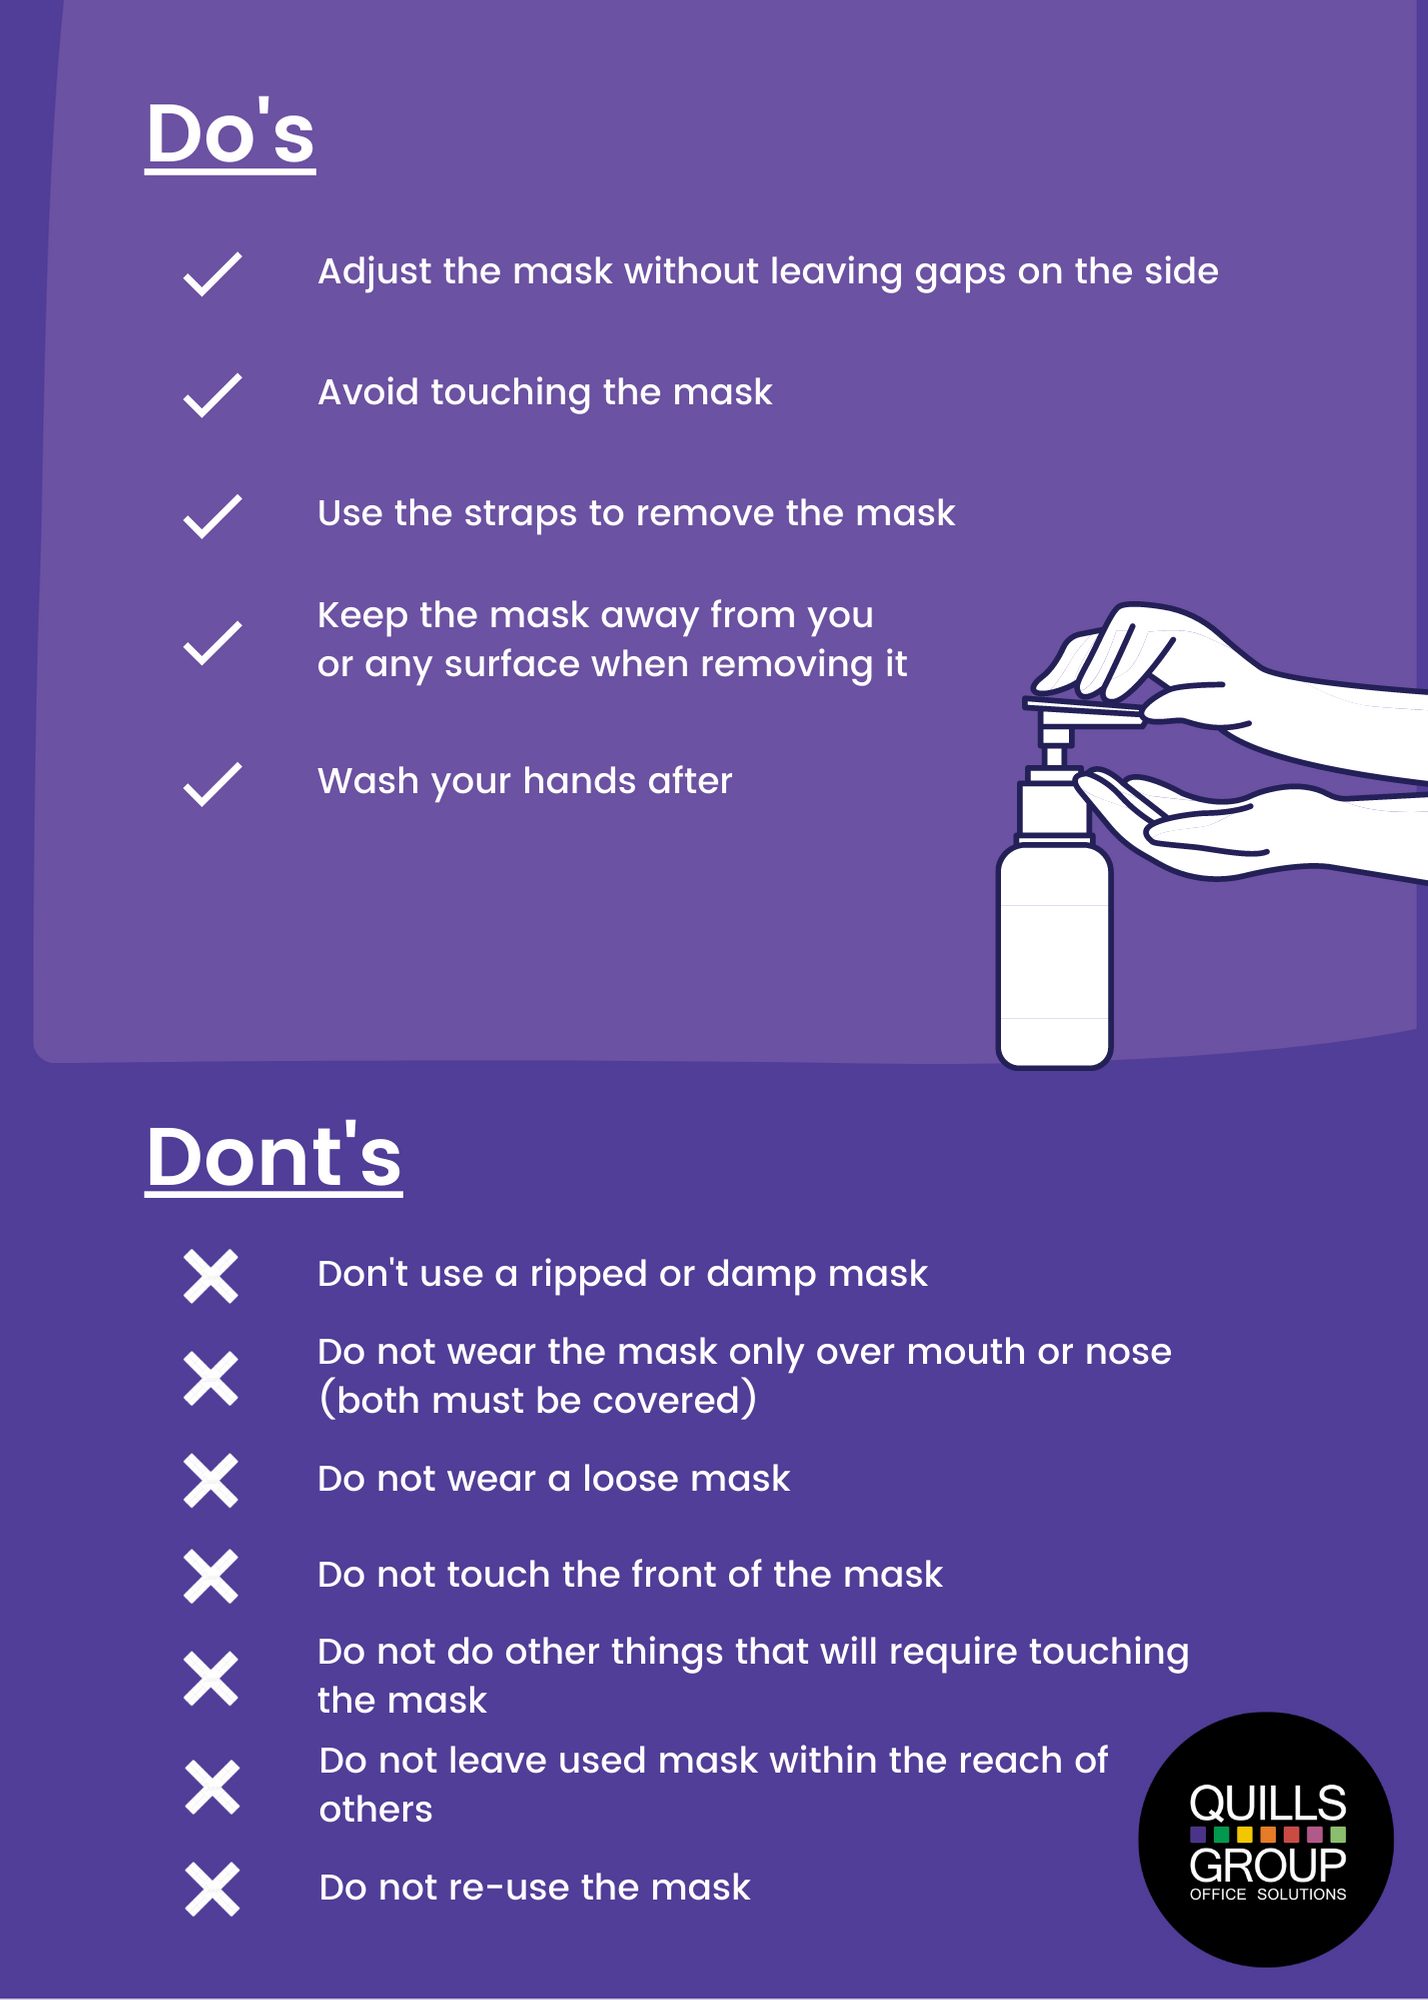 How to safely wear a mask infographic 2